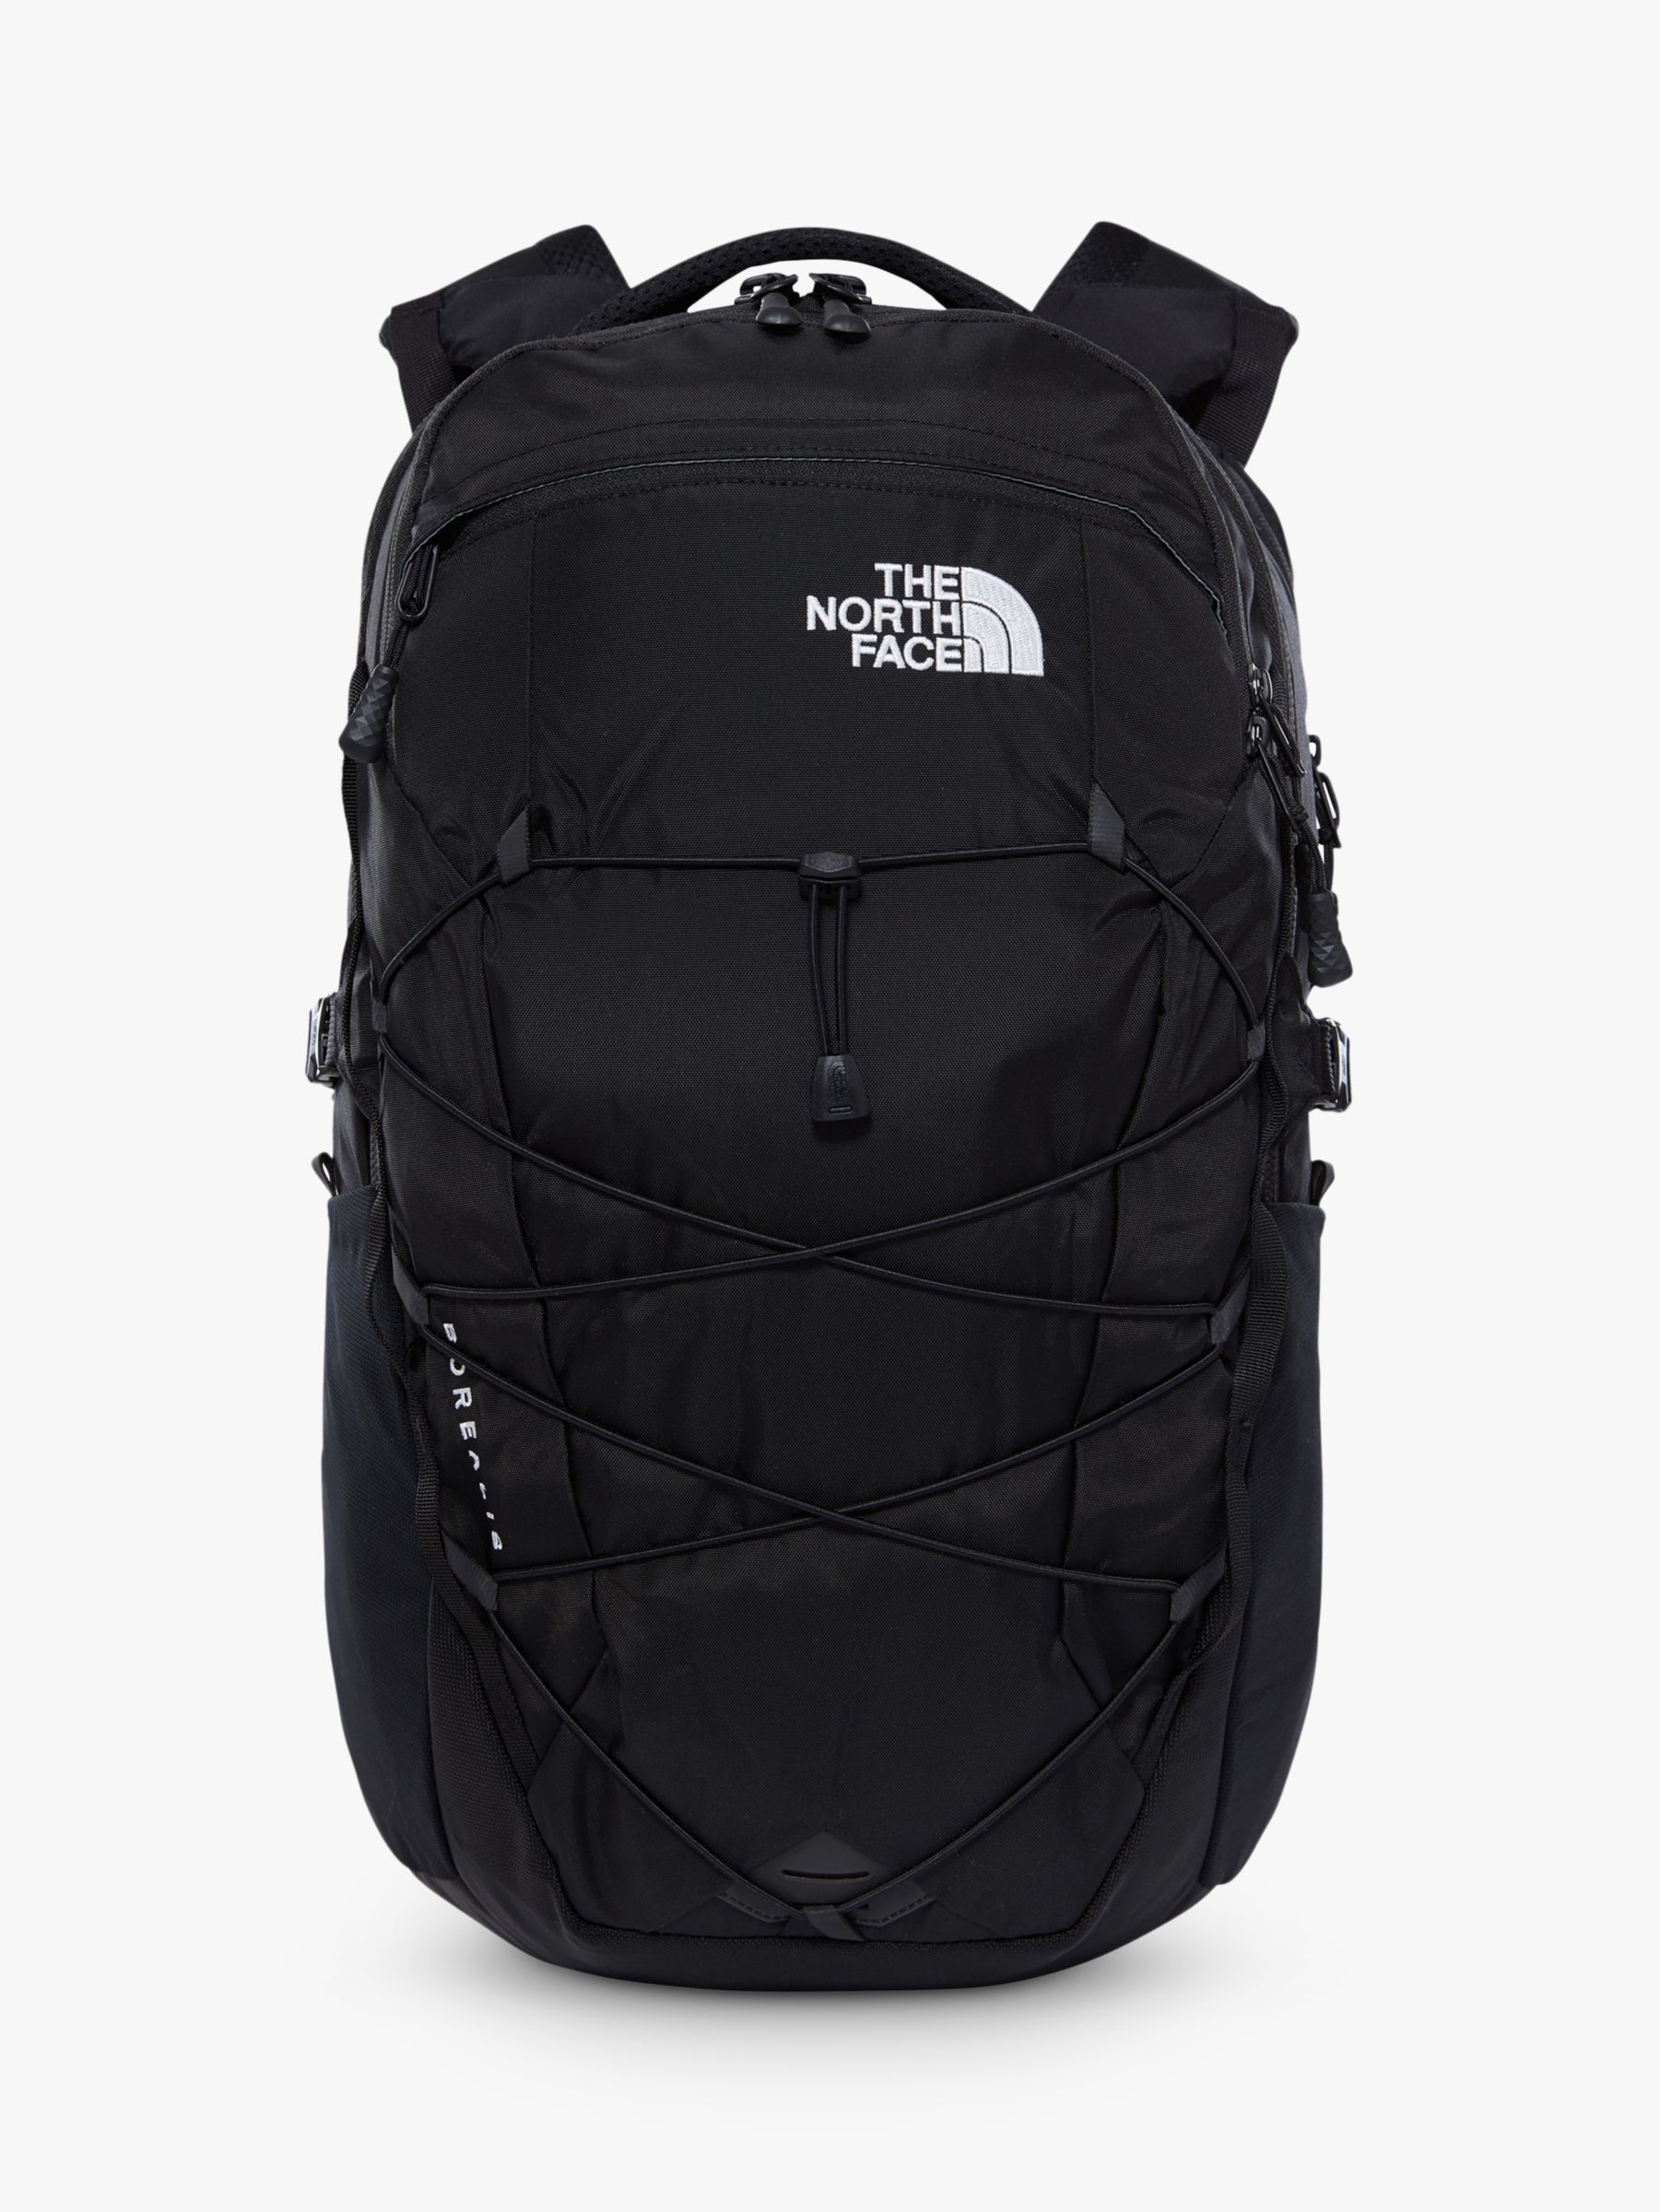 washing north face backpack